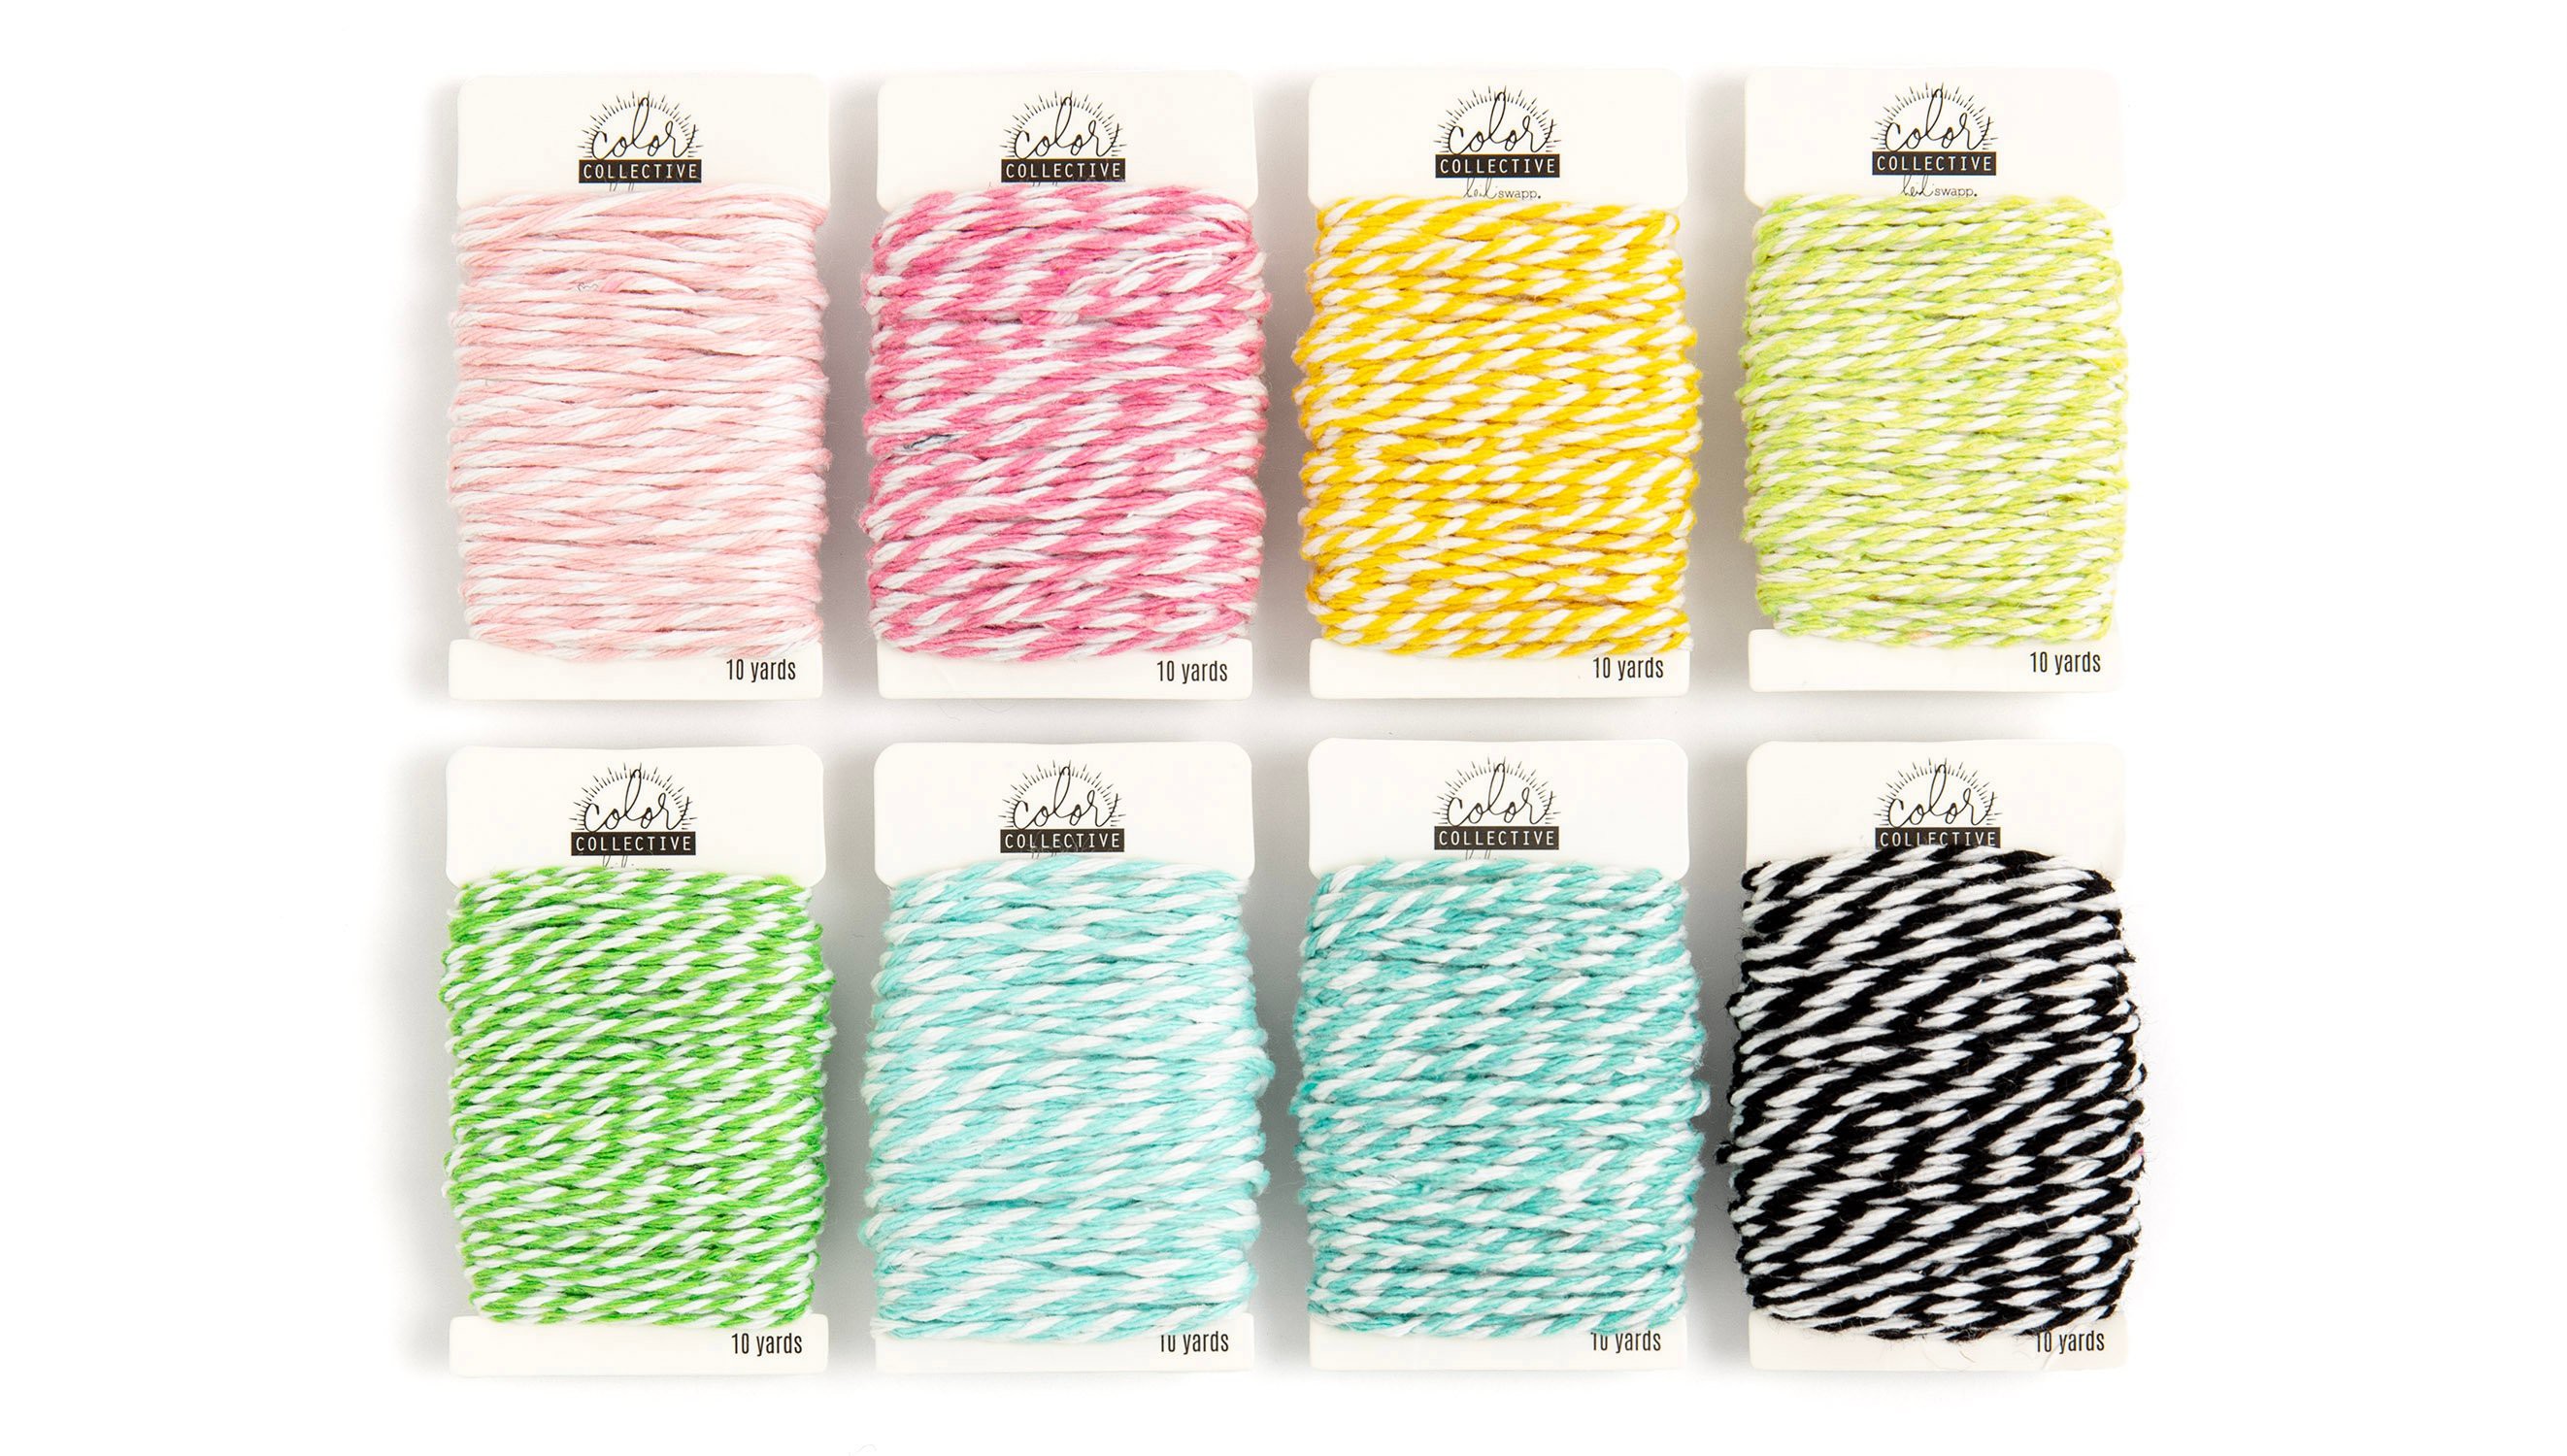 How To: Make Your Own Colorful Baker's Twine for Cheap! - Curbly